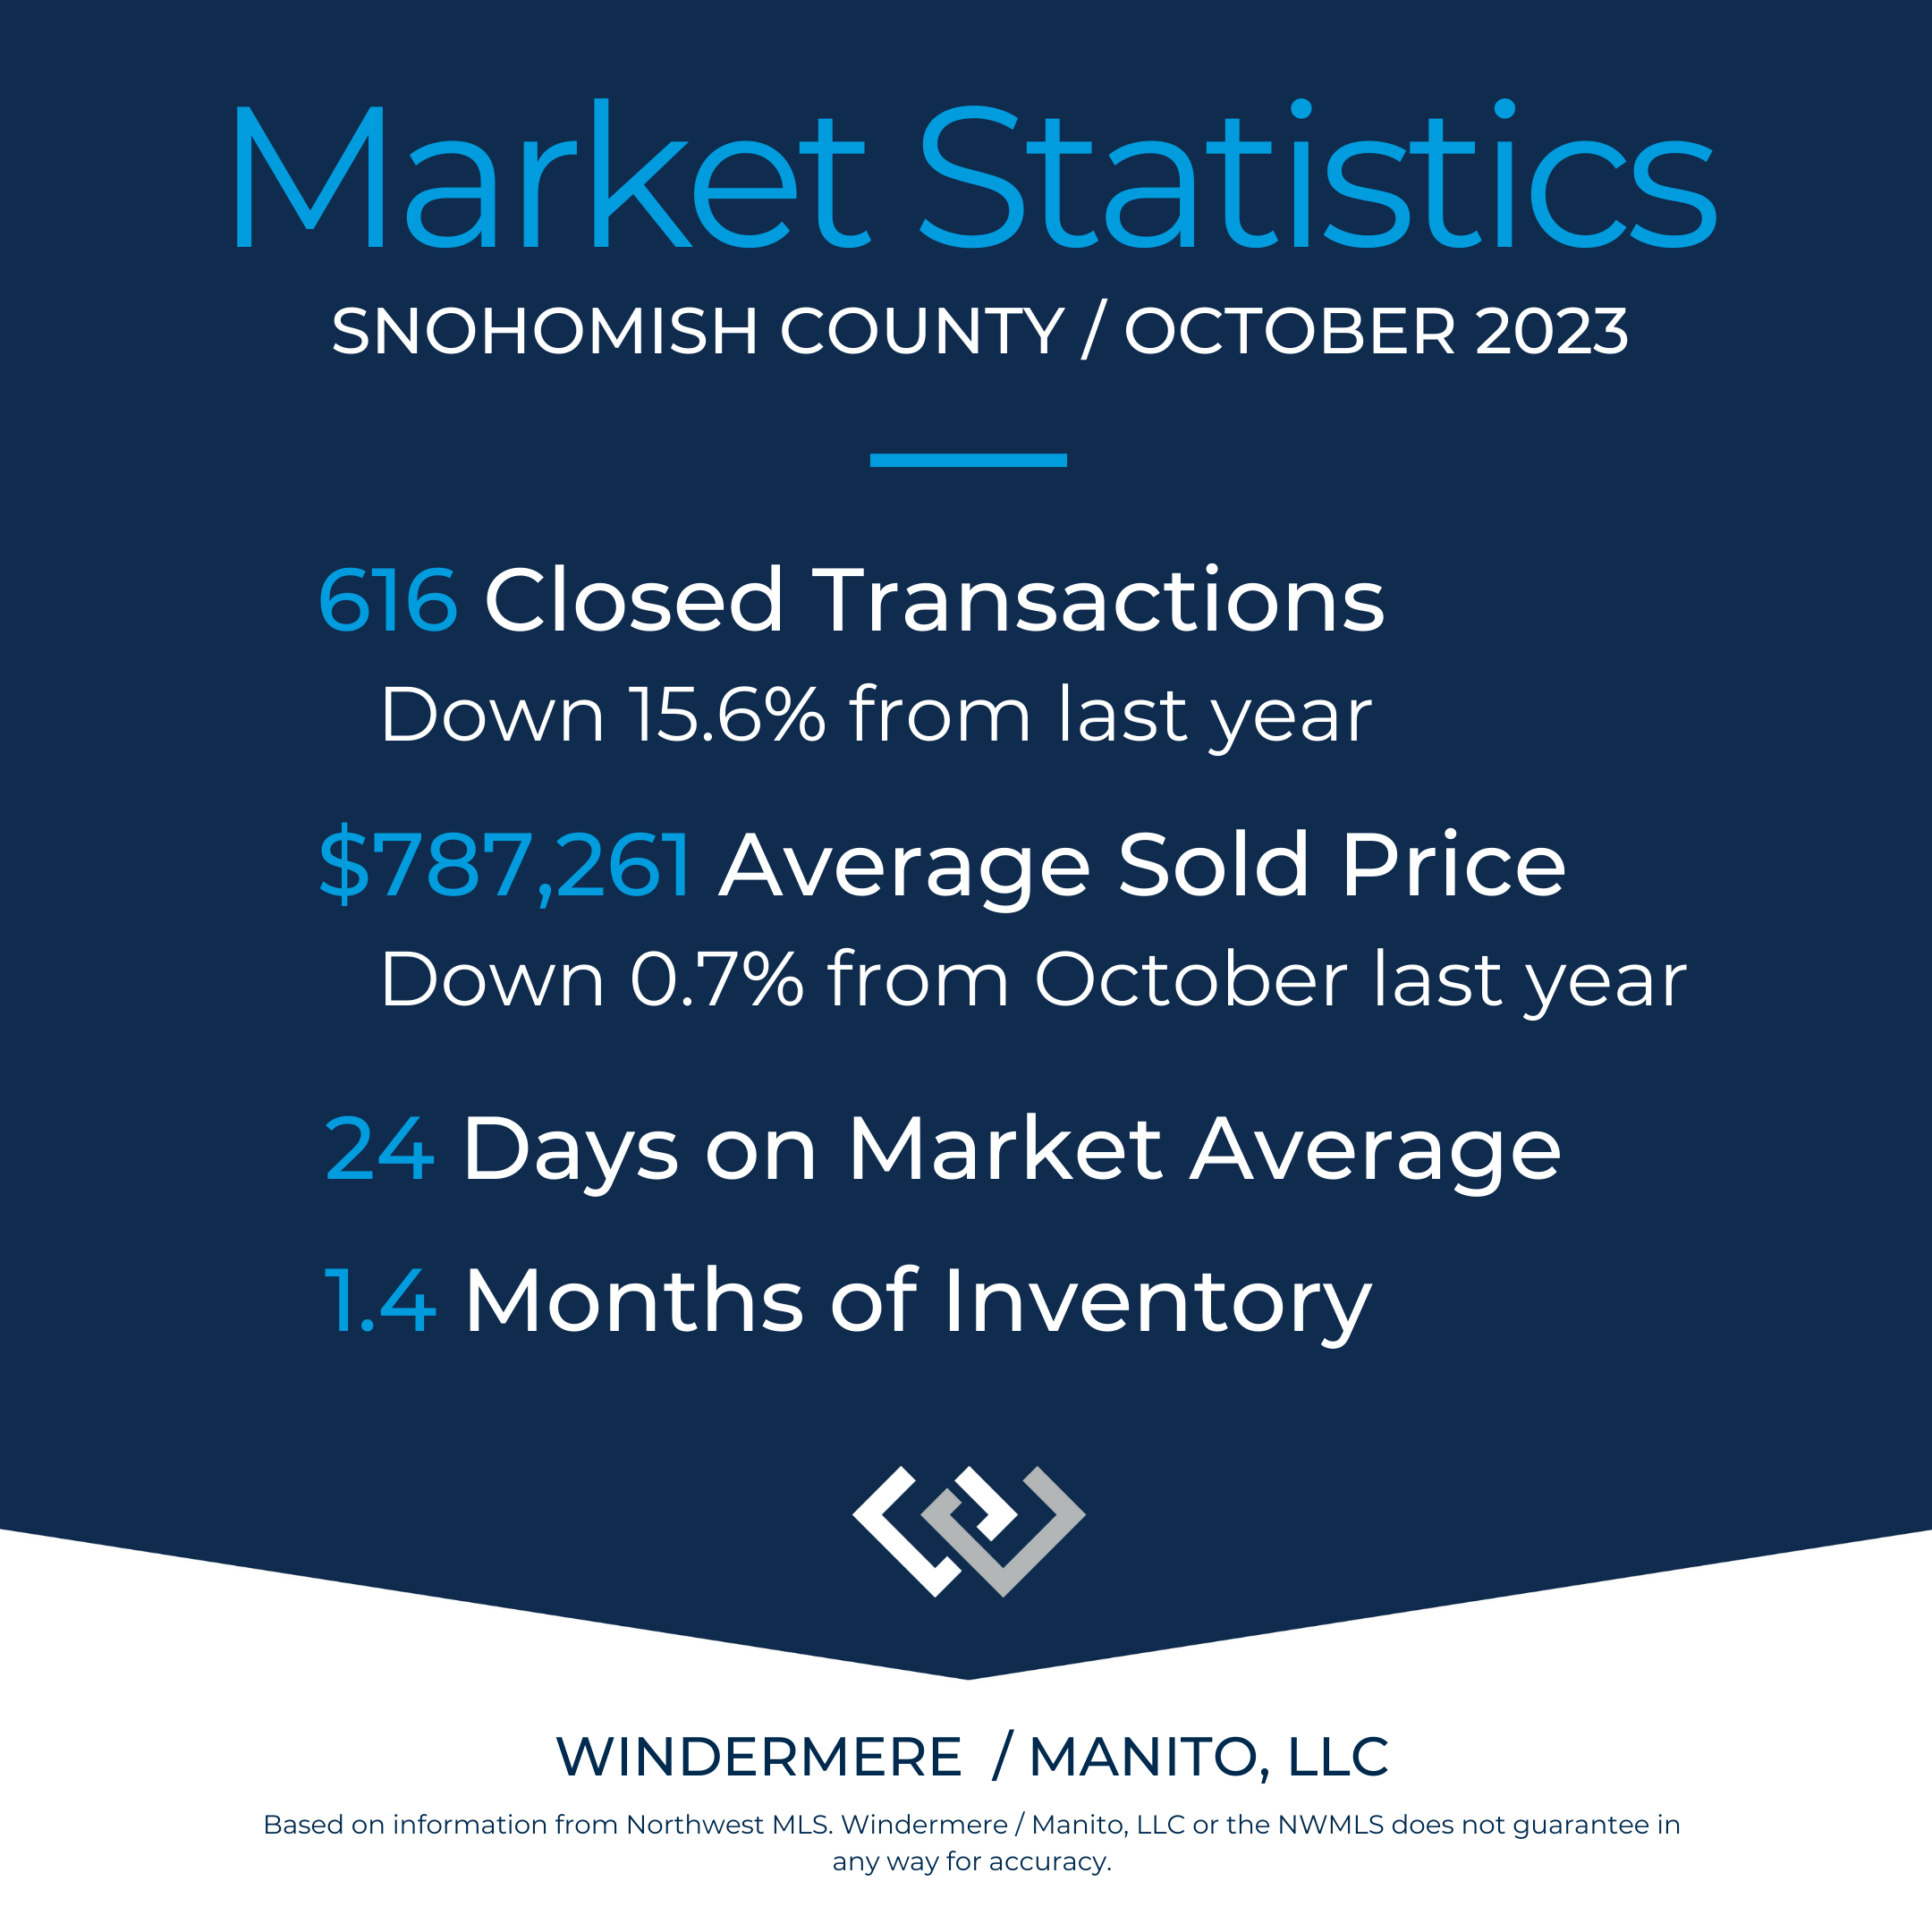 text shows market statistics for Snohomish County October 2023